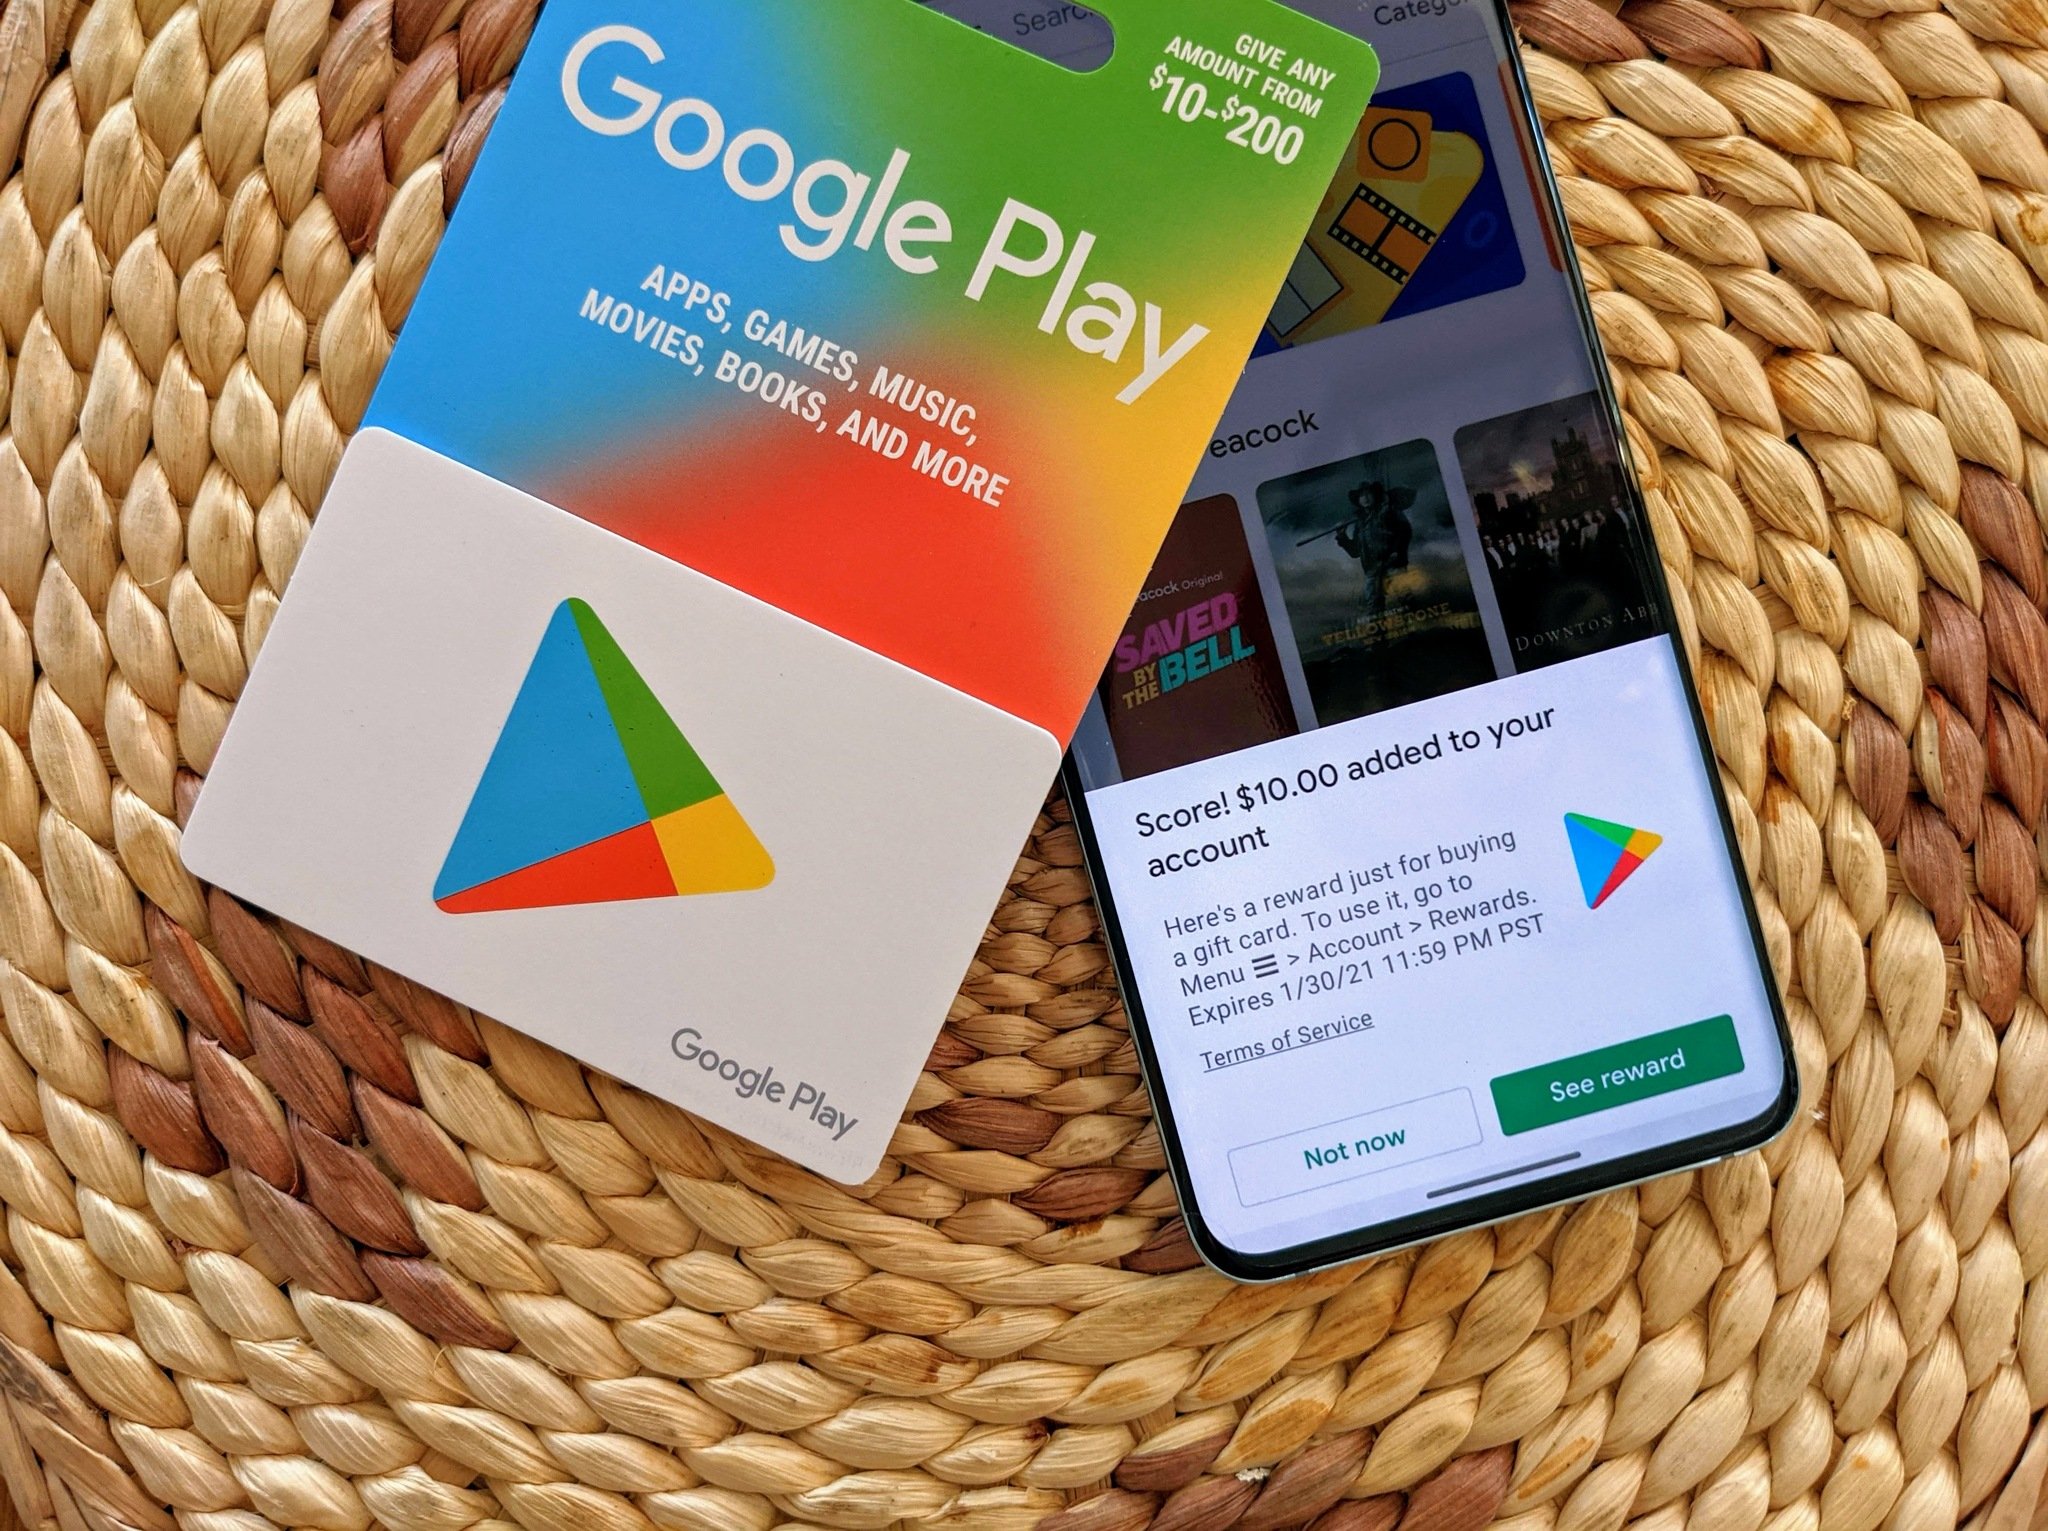 What Can You Use Google Play Gift Card for?